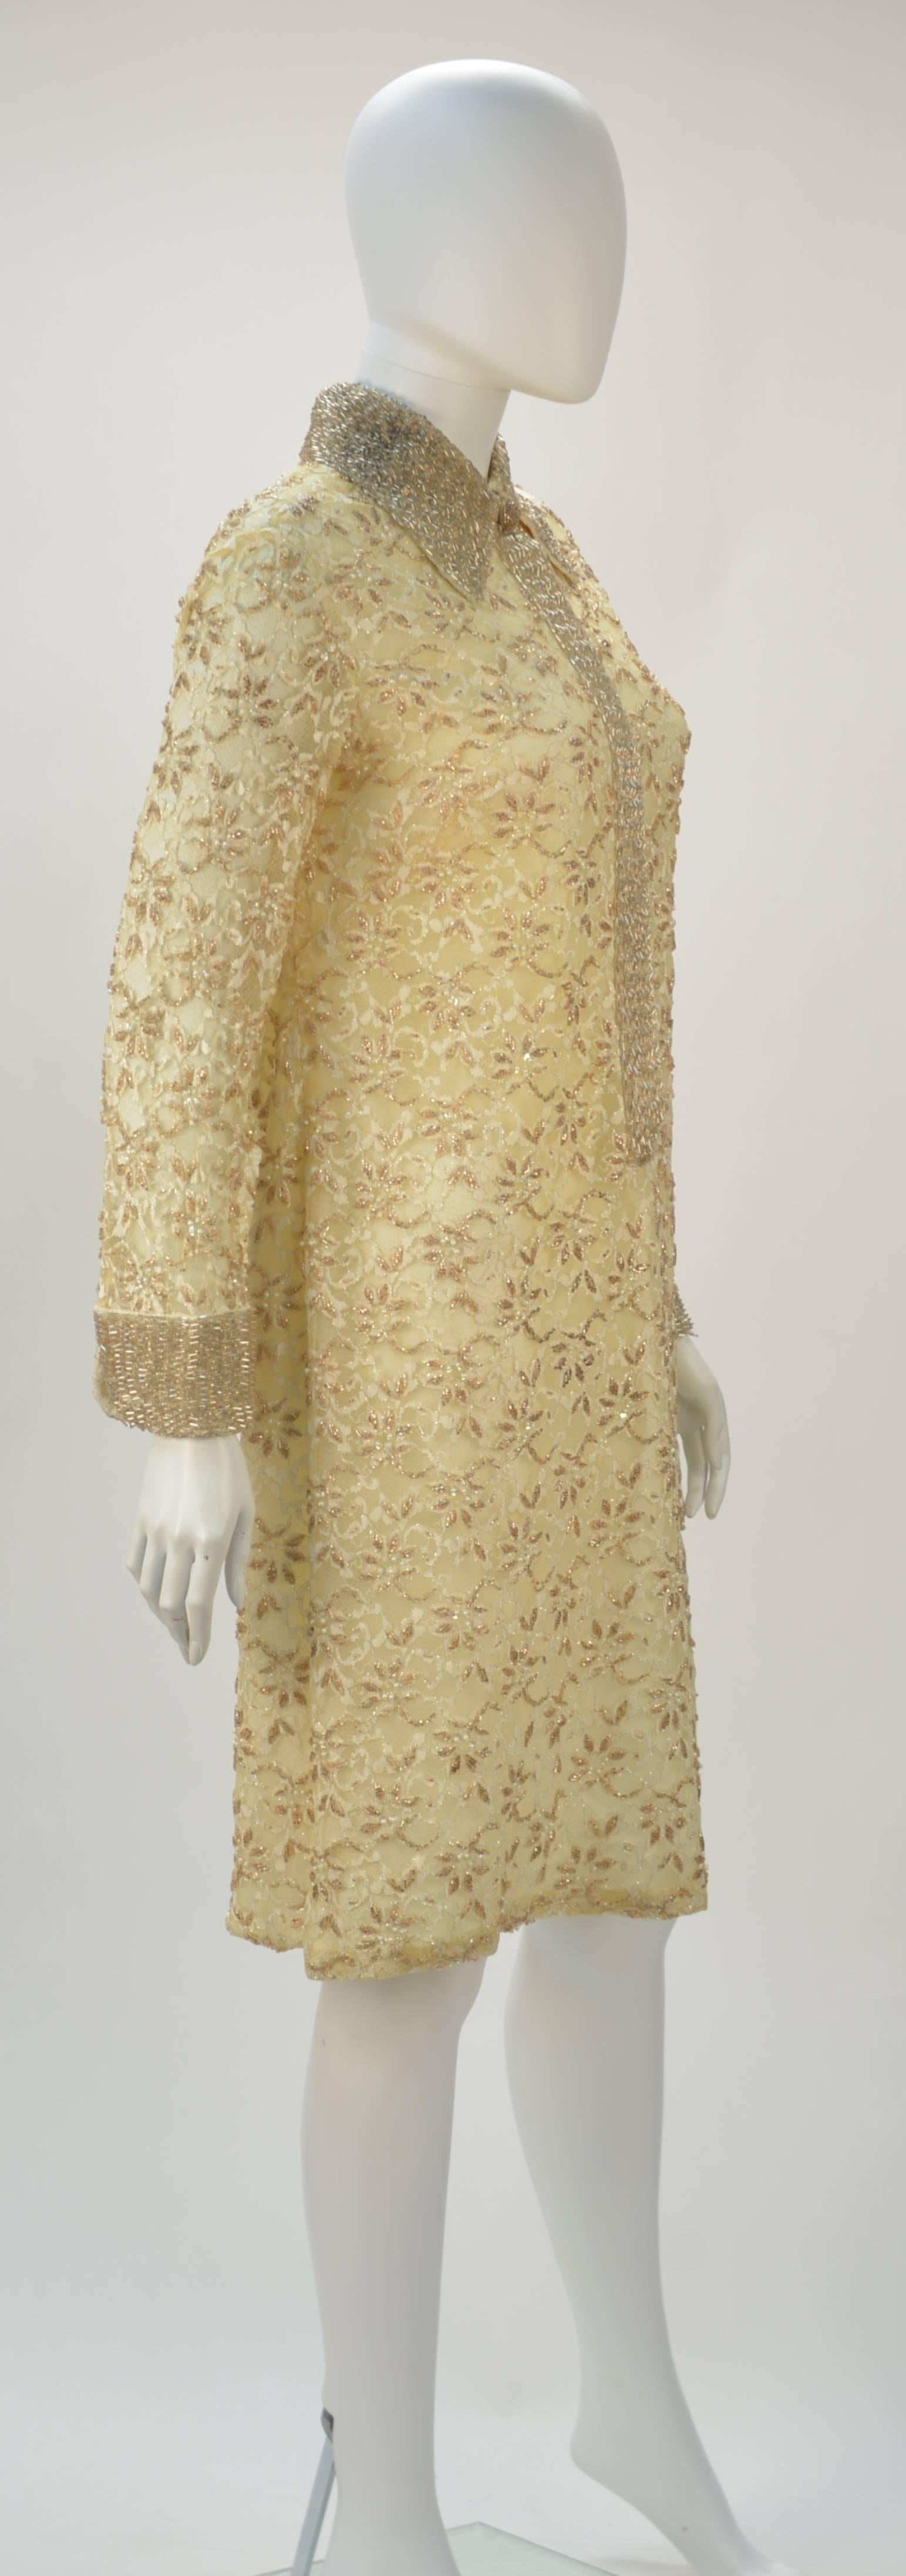 Refined 1960's cream beaded long sleeve tunic style cocktail dress by Valentina LTD. While difficult to see on a white background, Valentina's attention to detail and creative and intricate designs using beadwork make Valentina a coveted line to